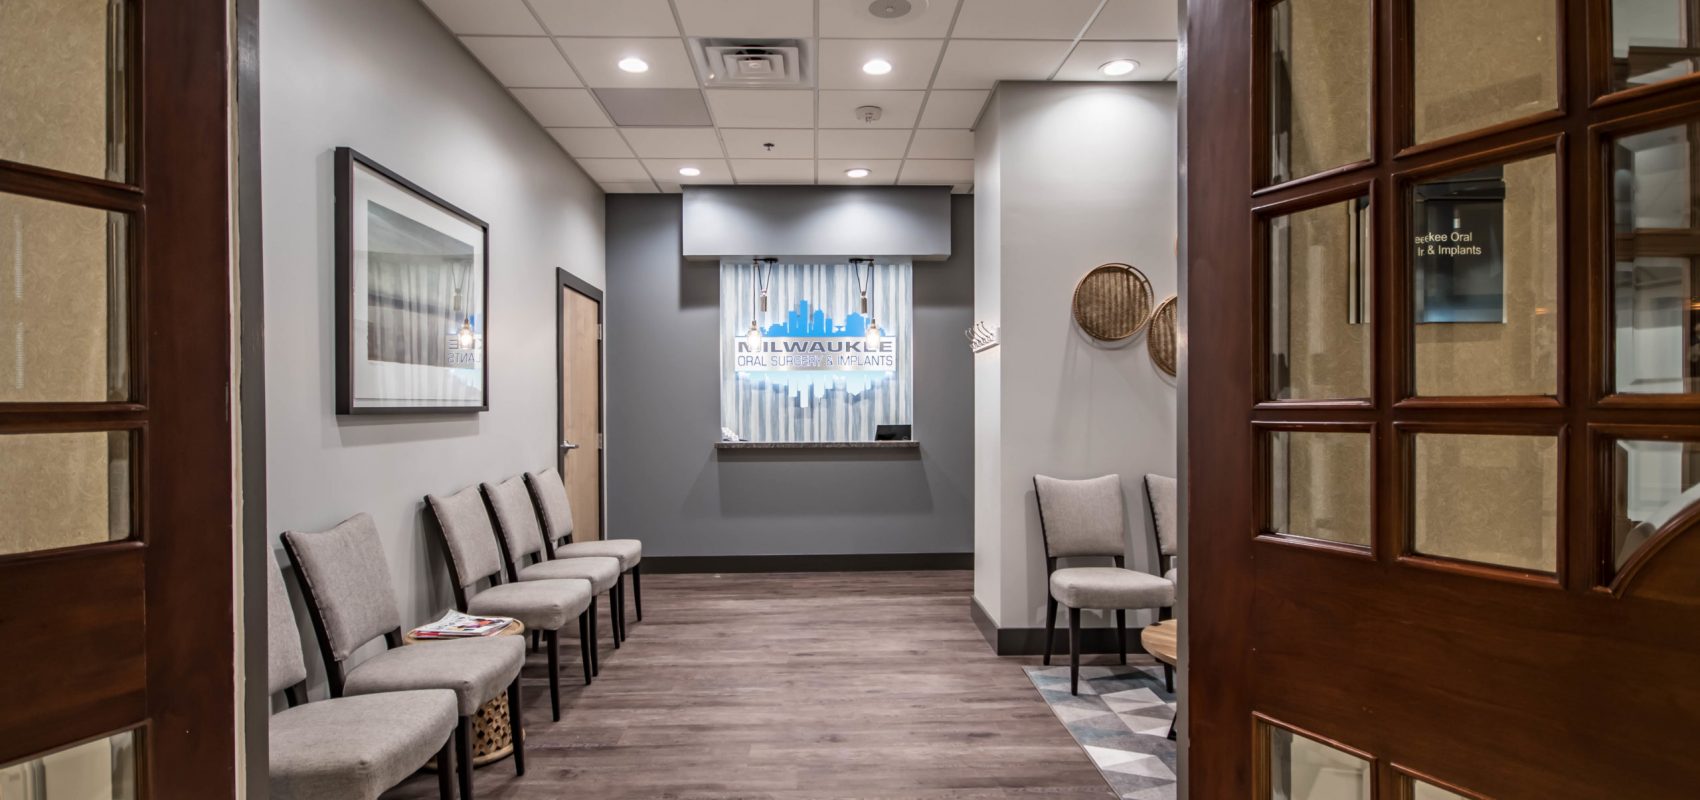 MKE Oral Surgery_January 27, 2020_019-HDR